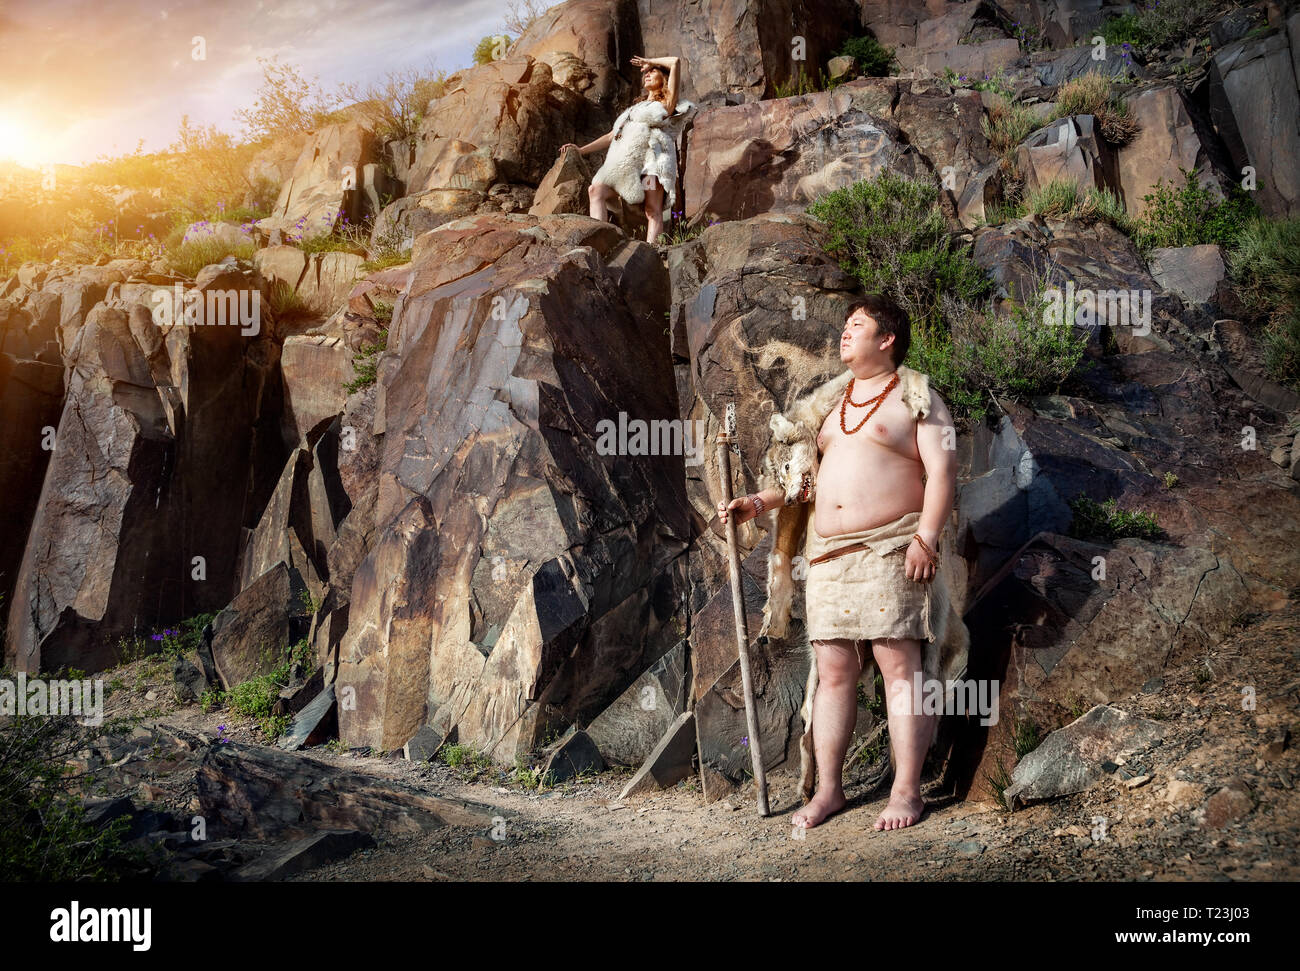 Primitive people dressed in animal skin near ancient cave drawing in the mountains Stock Photo